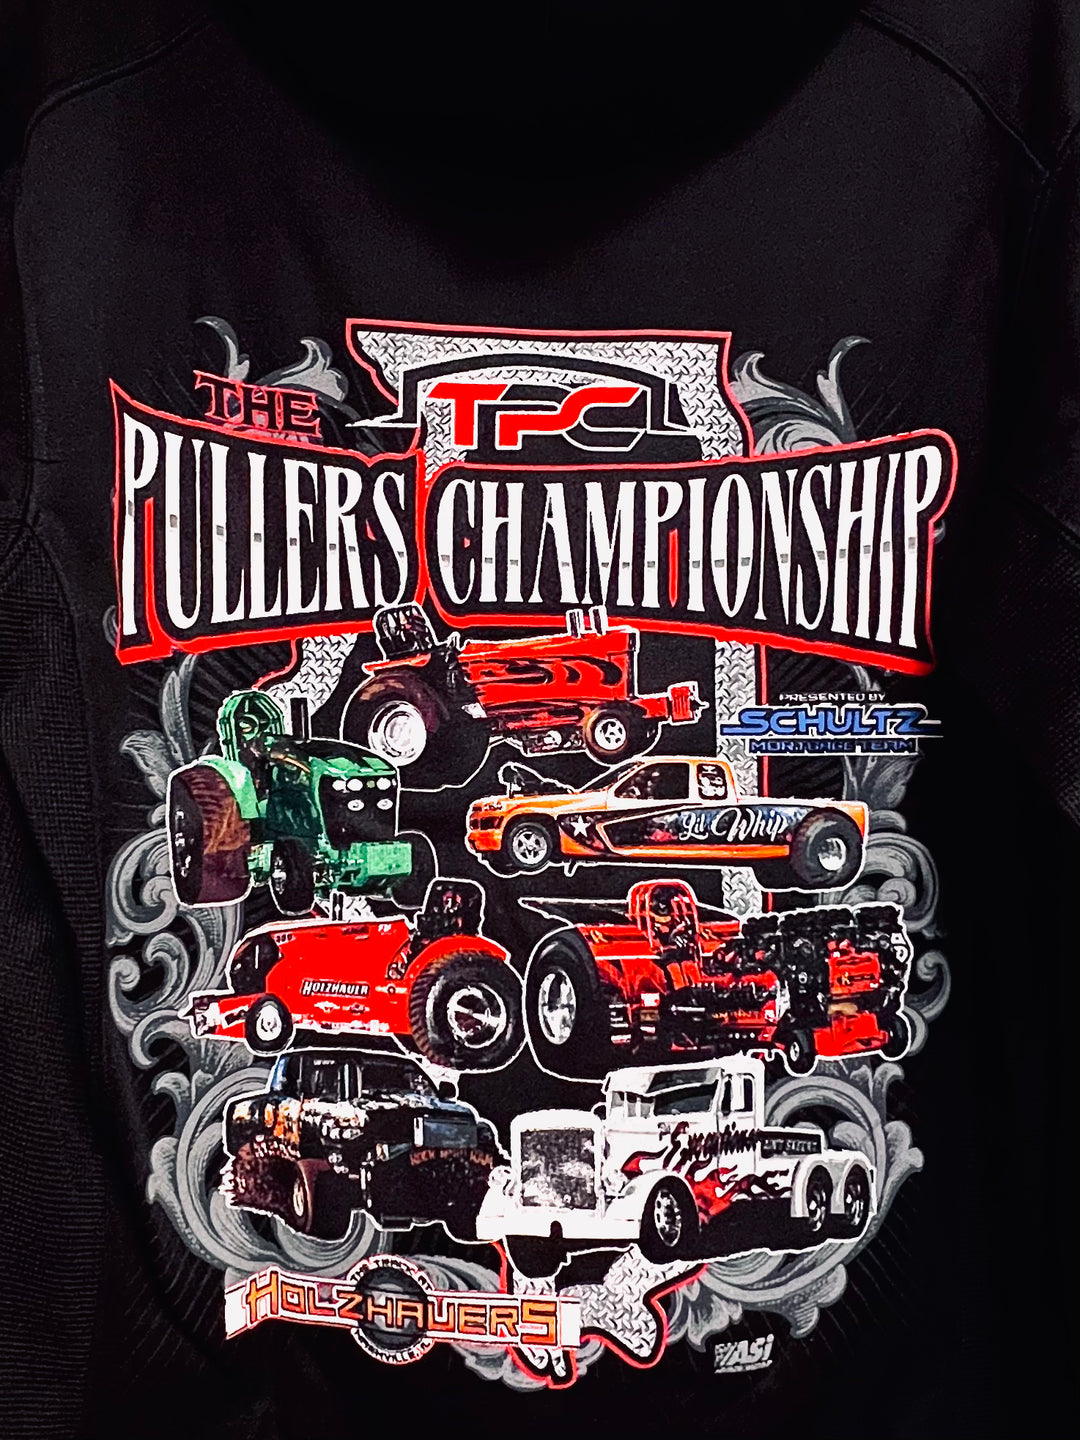 The Pullers Championship Tee